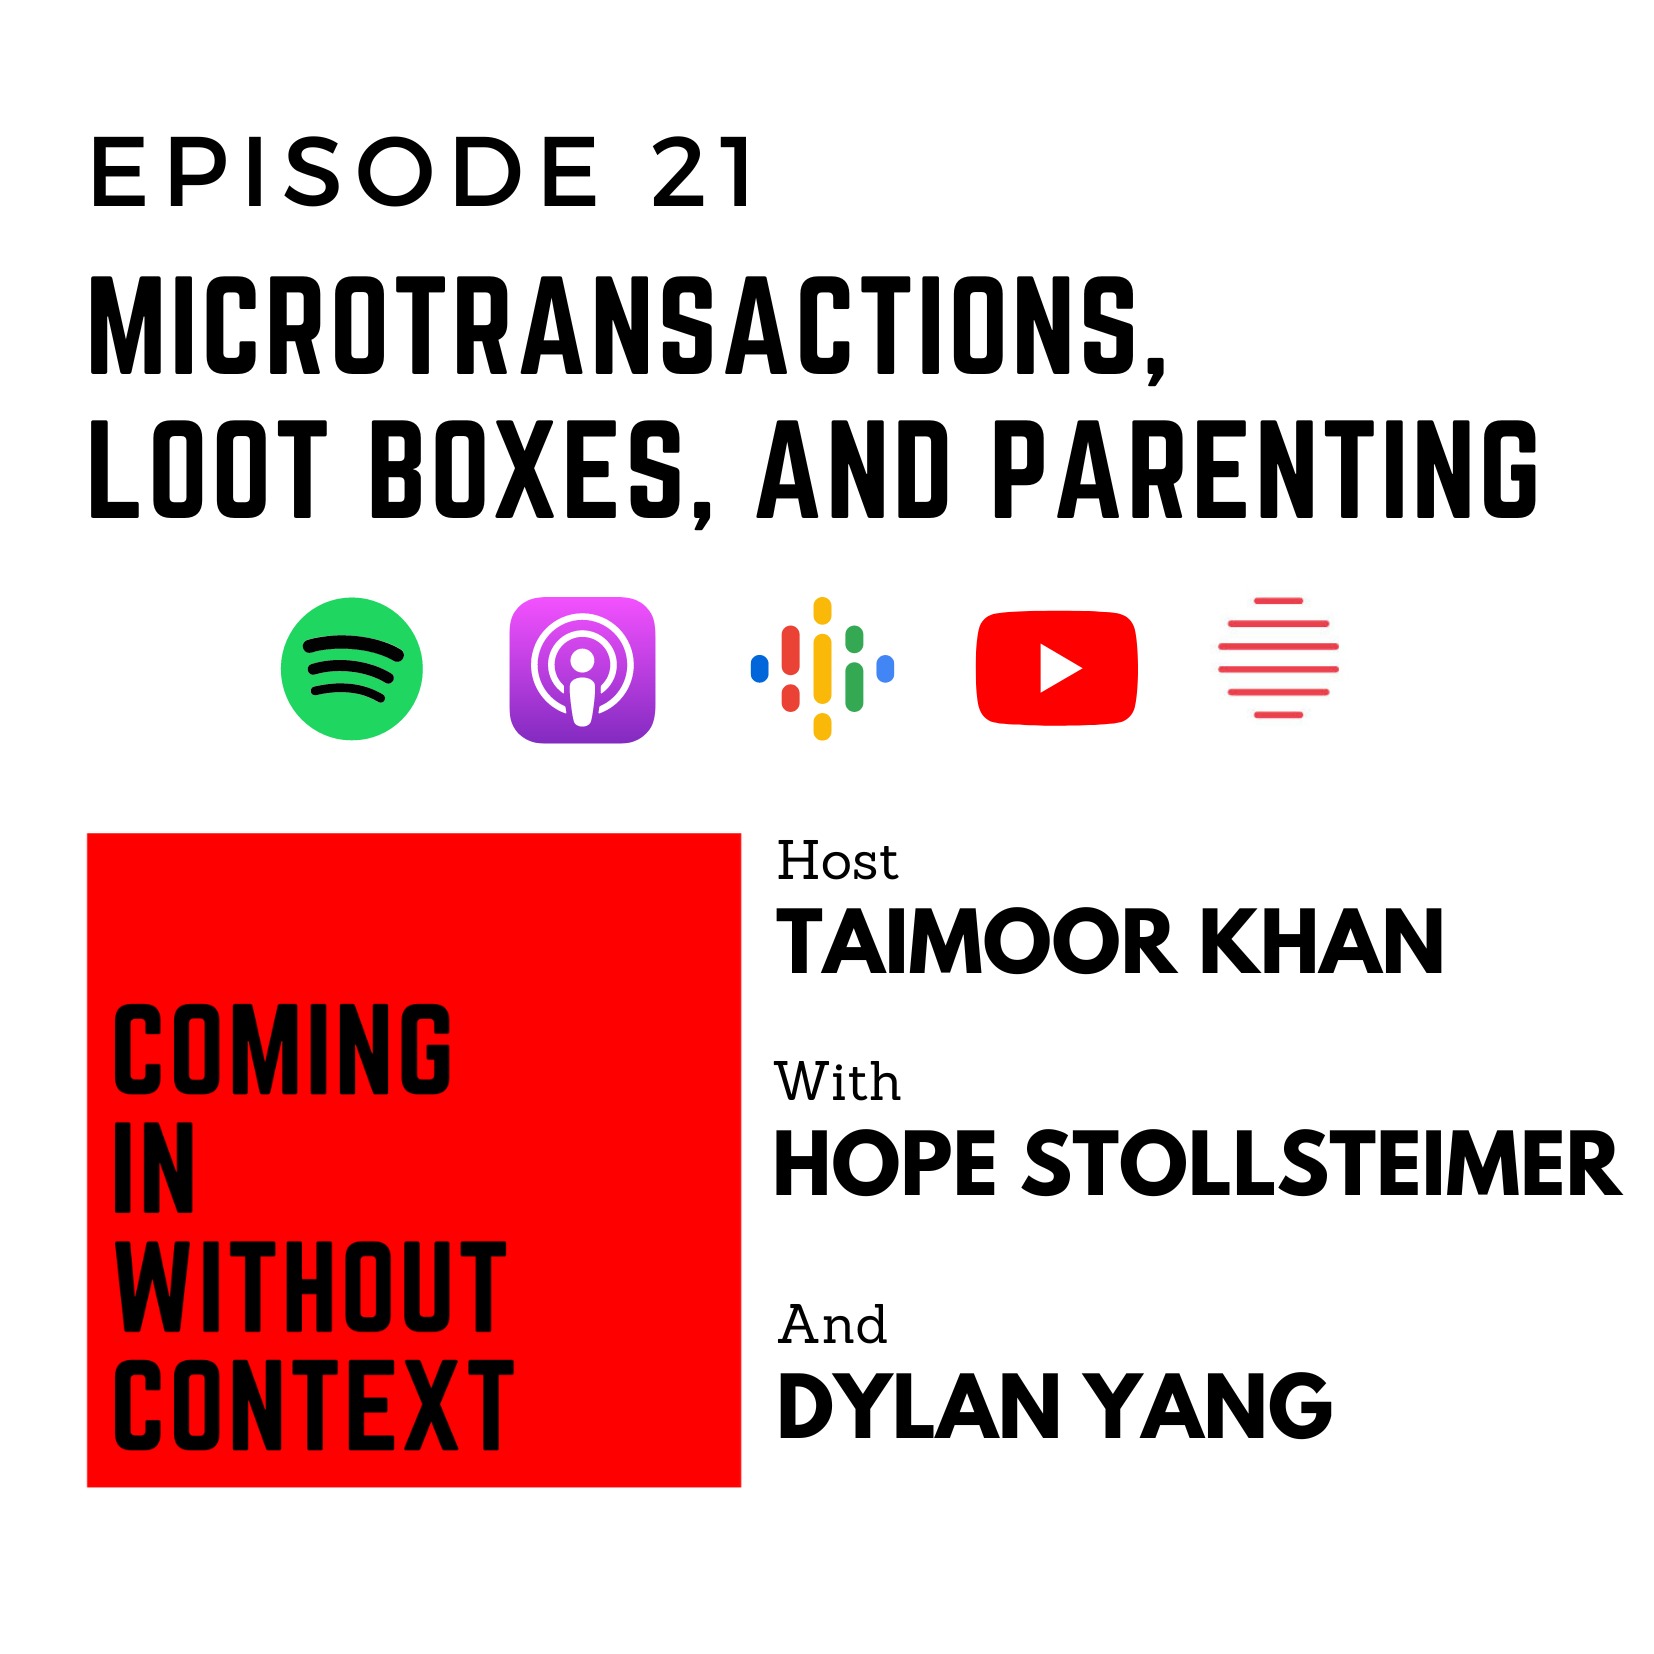 EP 21: Microtransactions, Loot Boxes, and Parenting